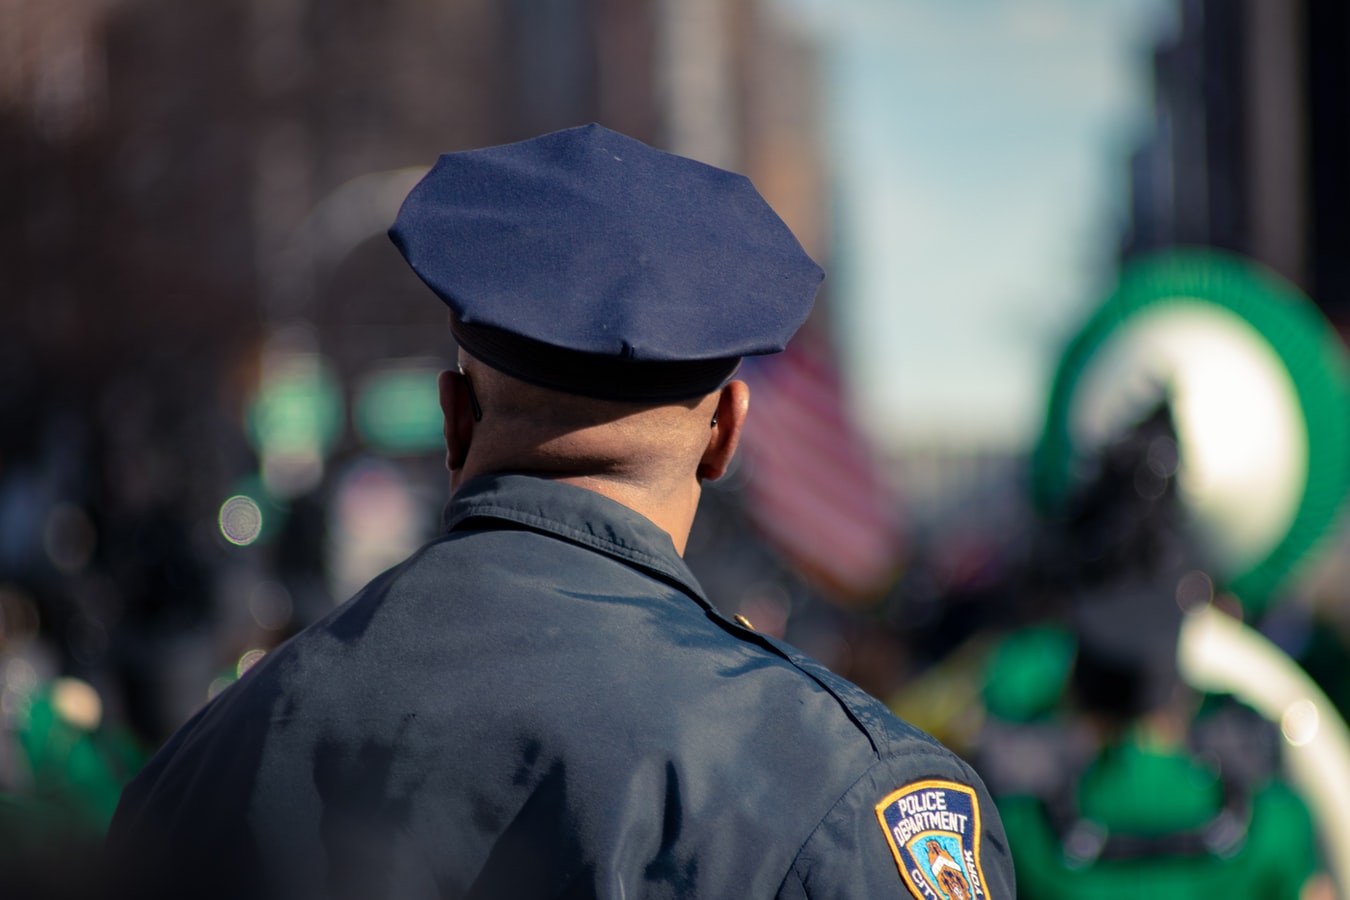 A police officer in New York